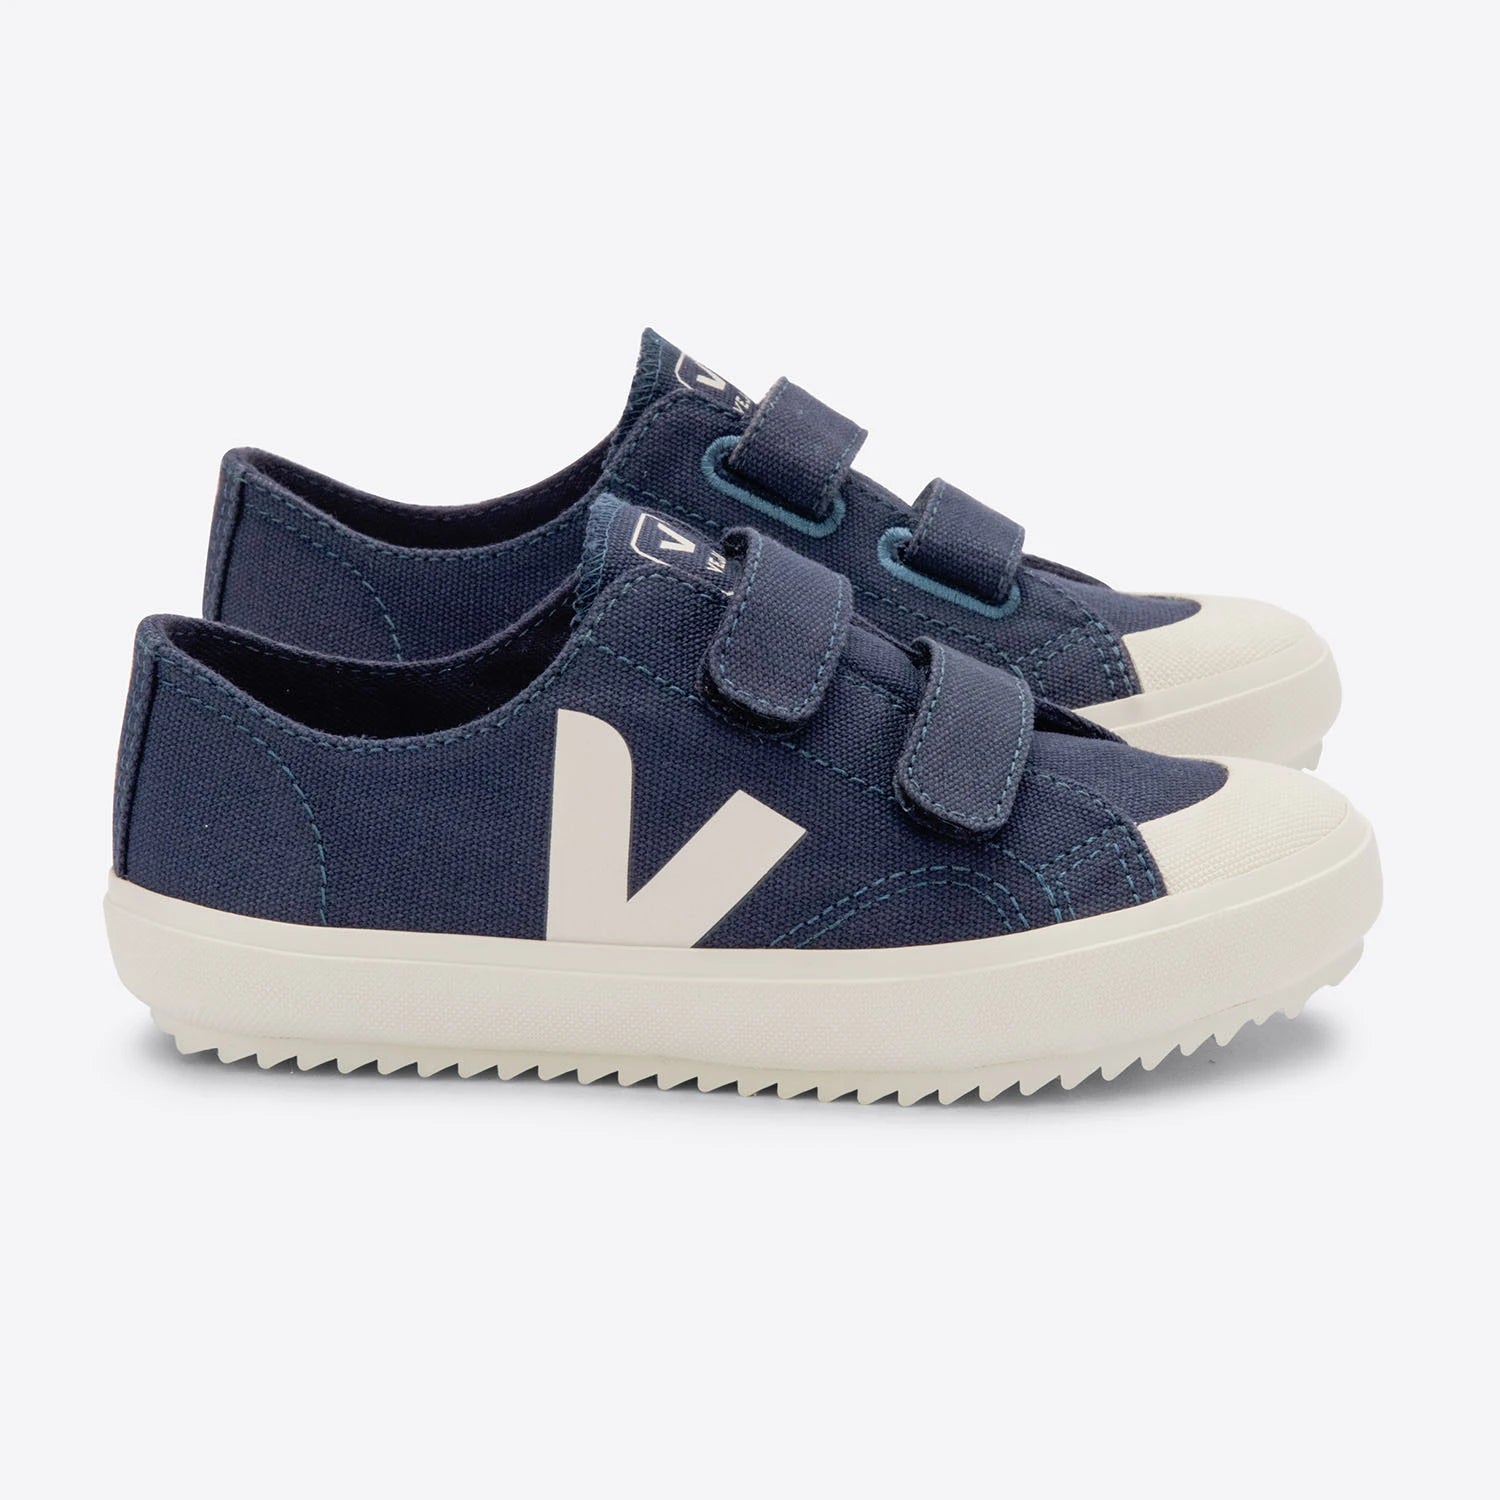 An image of Shop Kids Canvas Trainers: Stylish, Sustainable Trainers EU29/UK11.5